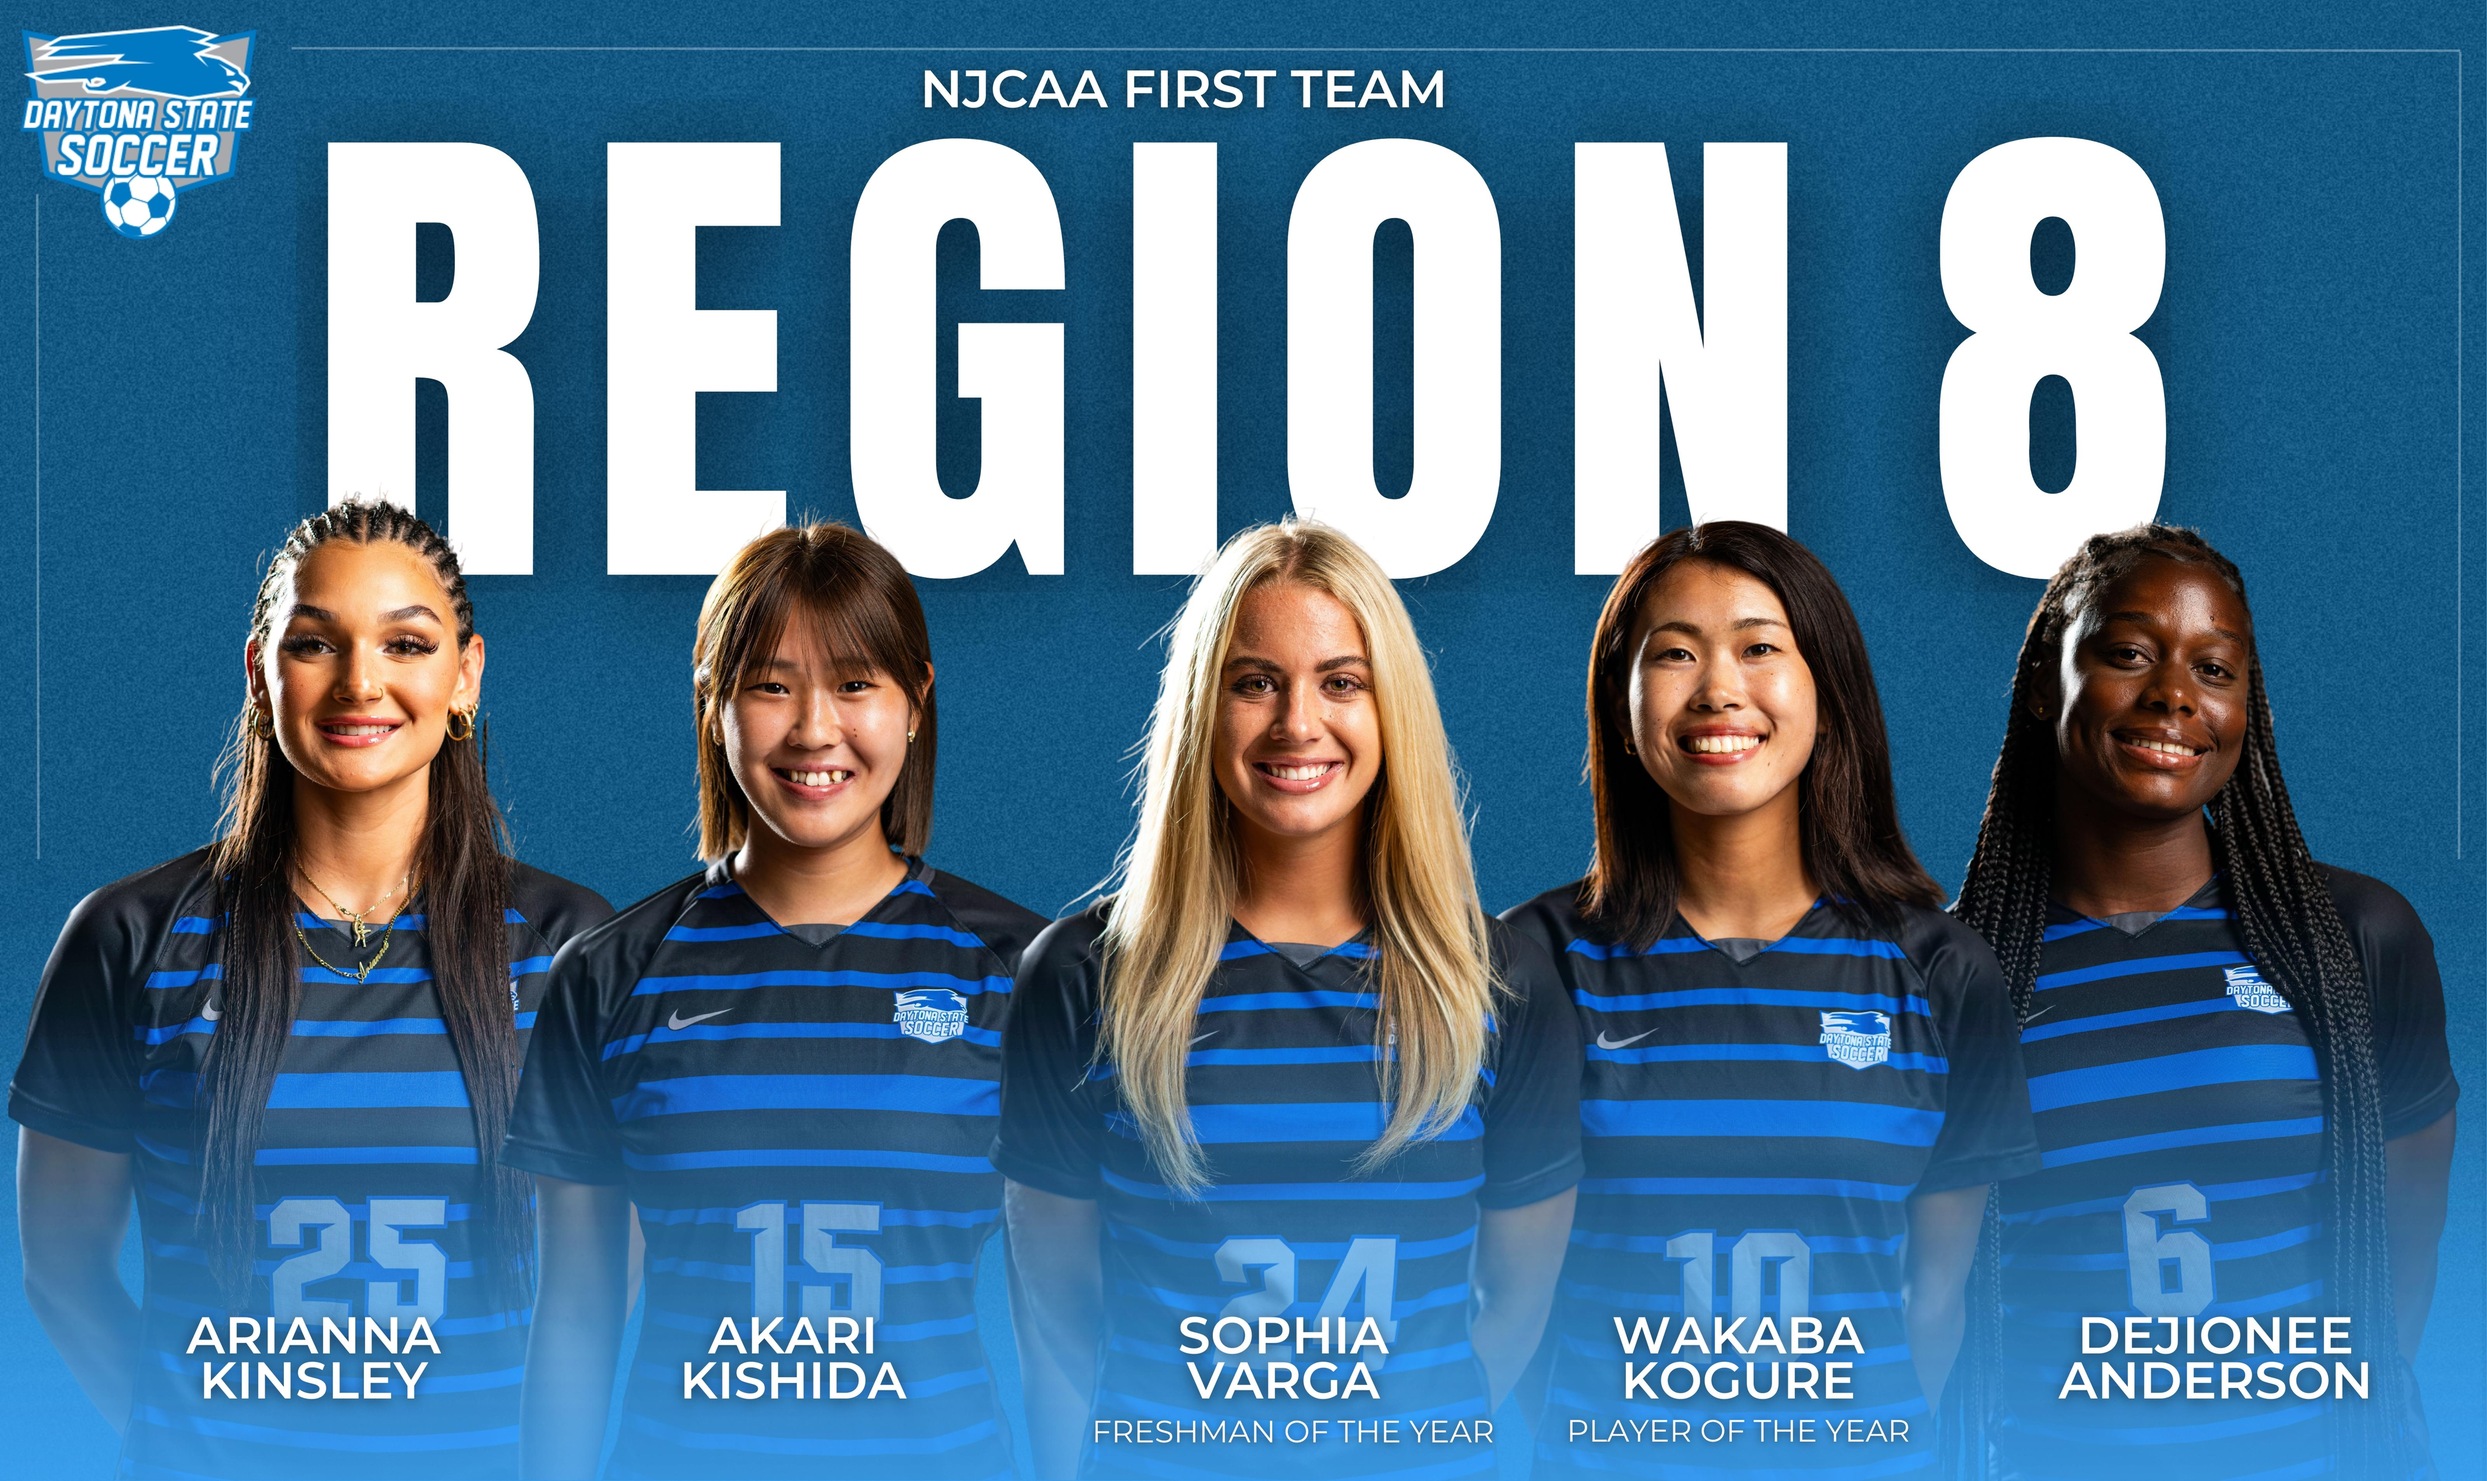 Kogure Named Player of the Year, Six Falcons and Coach Earn All-Region 8 Honors